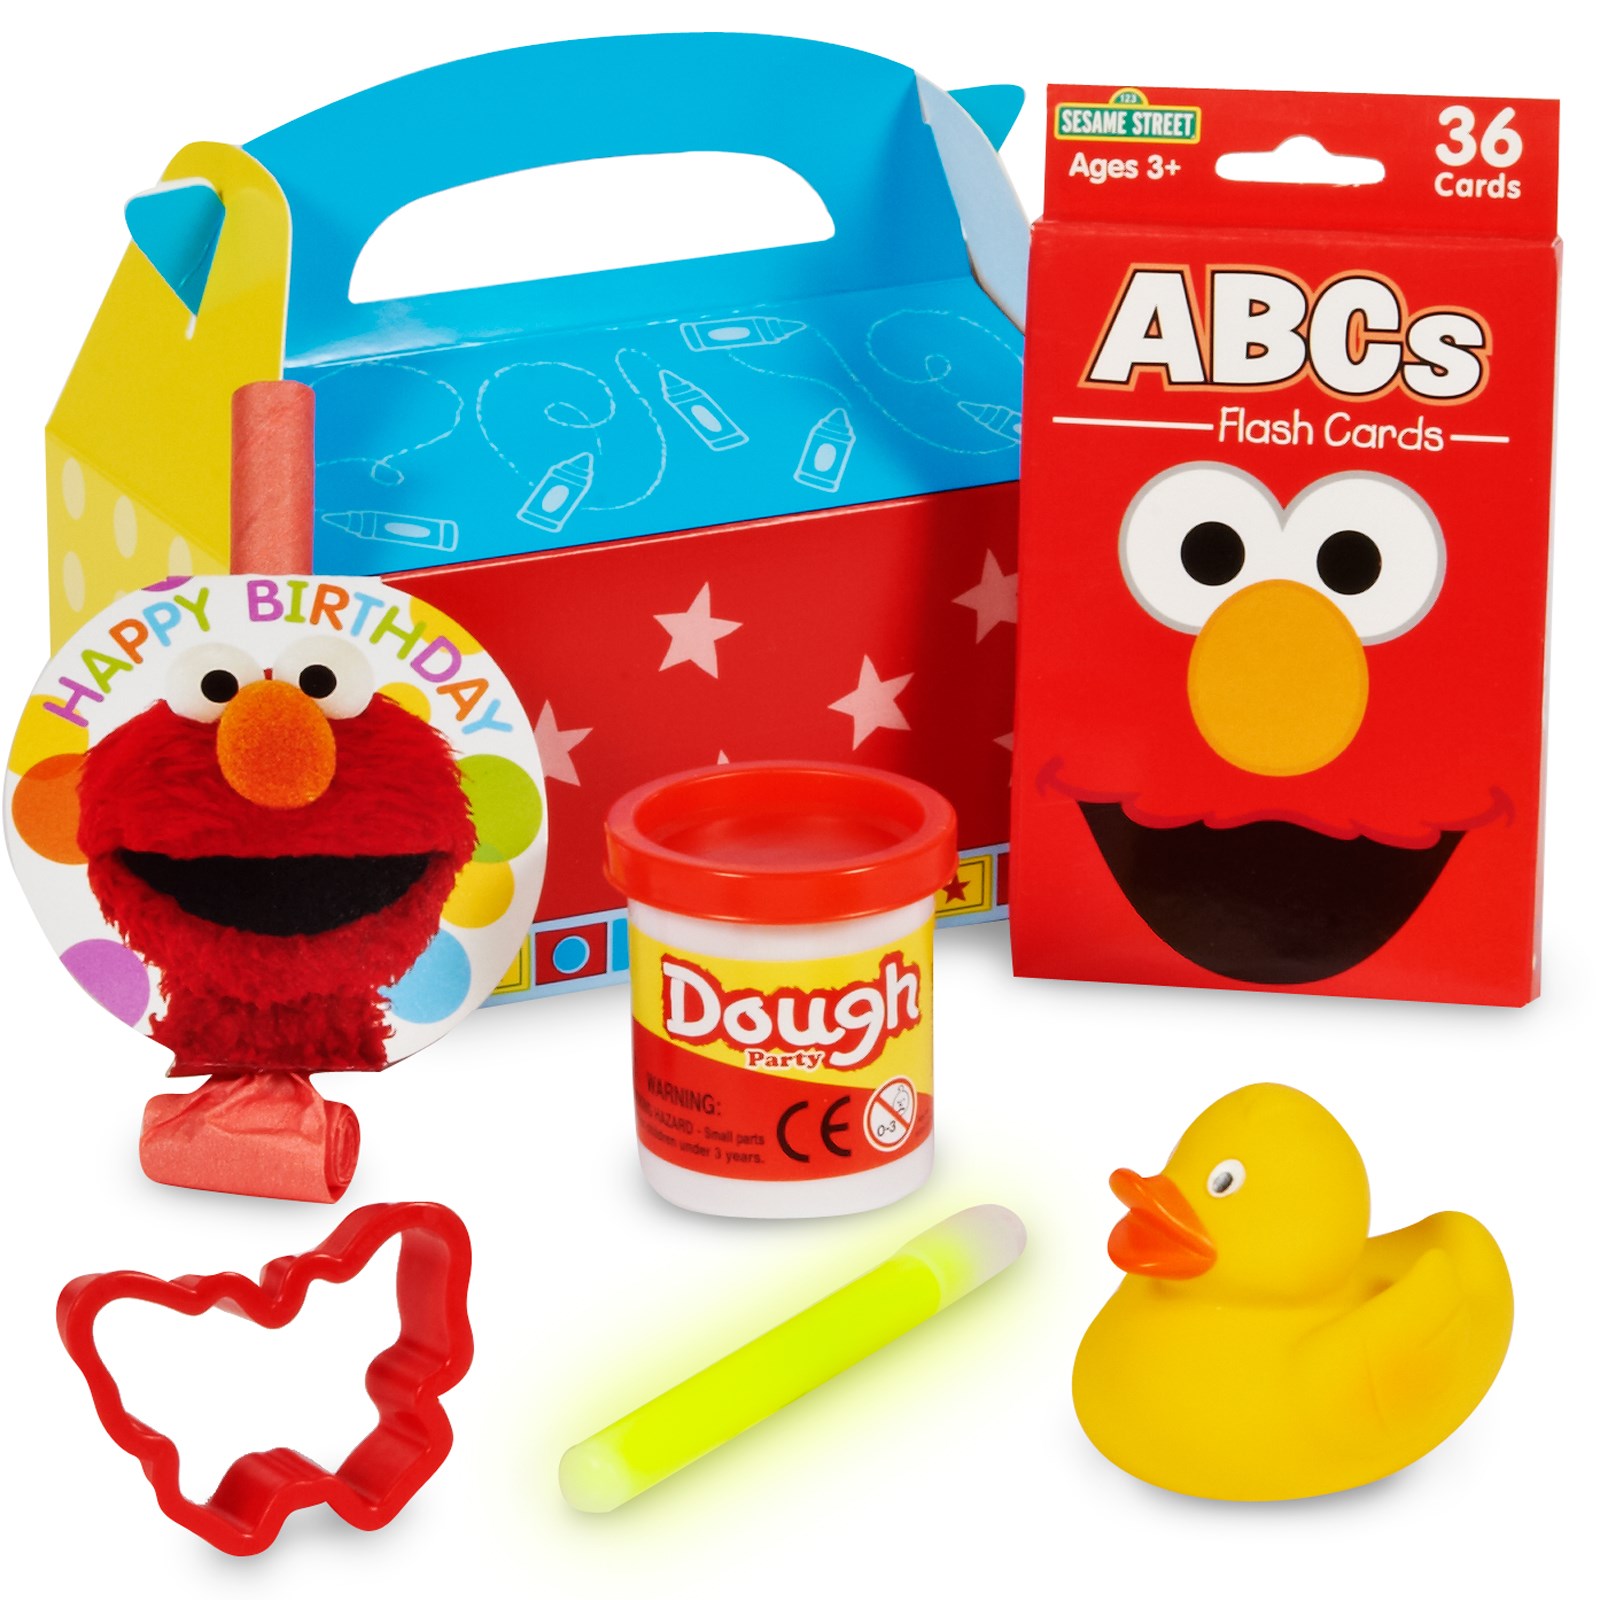 Sesame Street Elmo Party - Filled Party Favor Box for your Elmo Party Games for Toddlers 